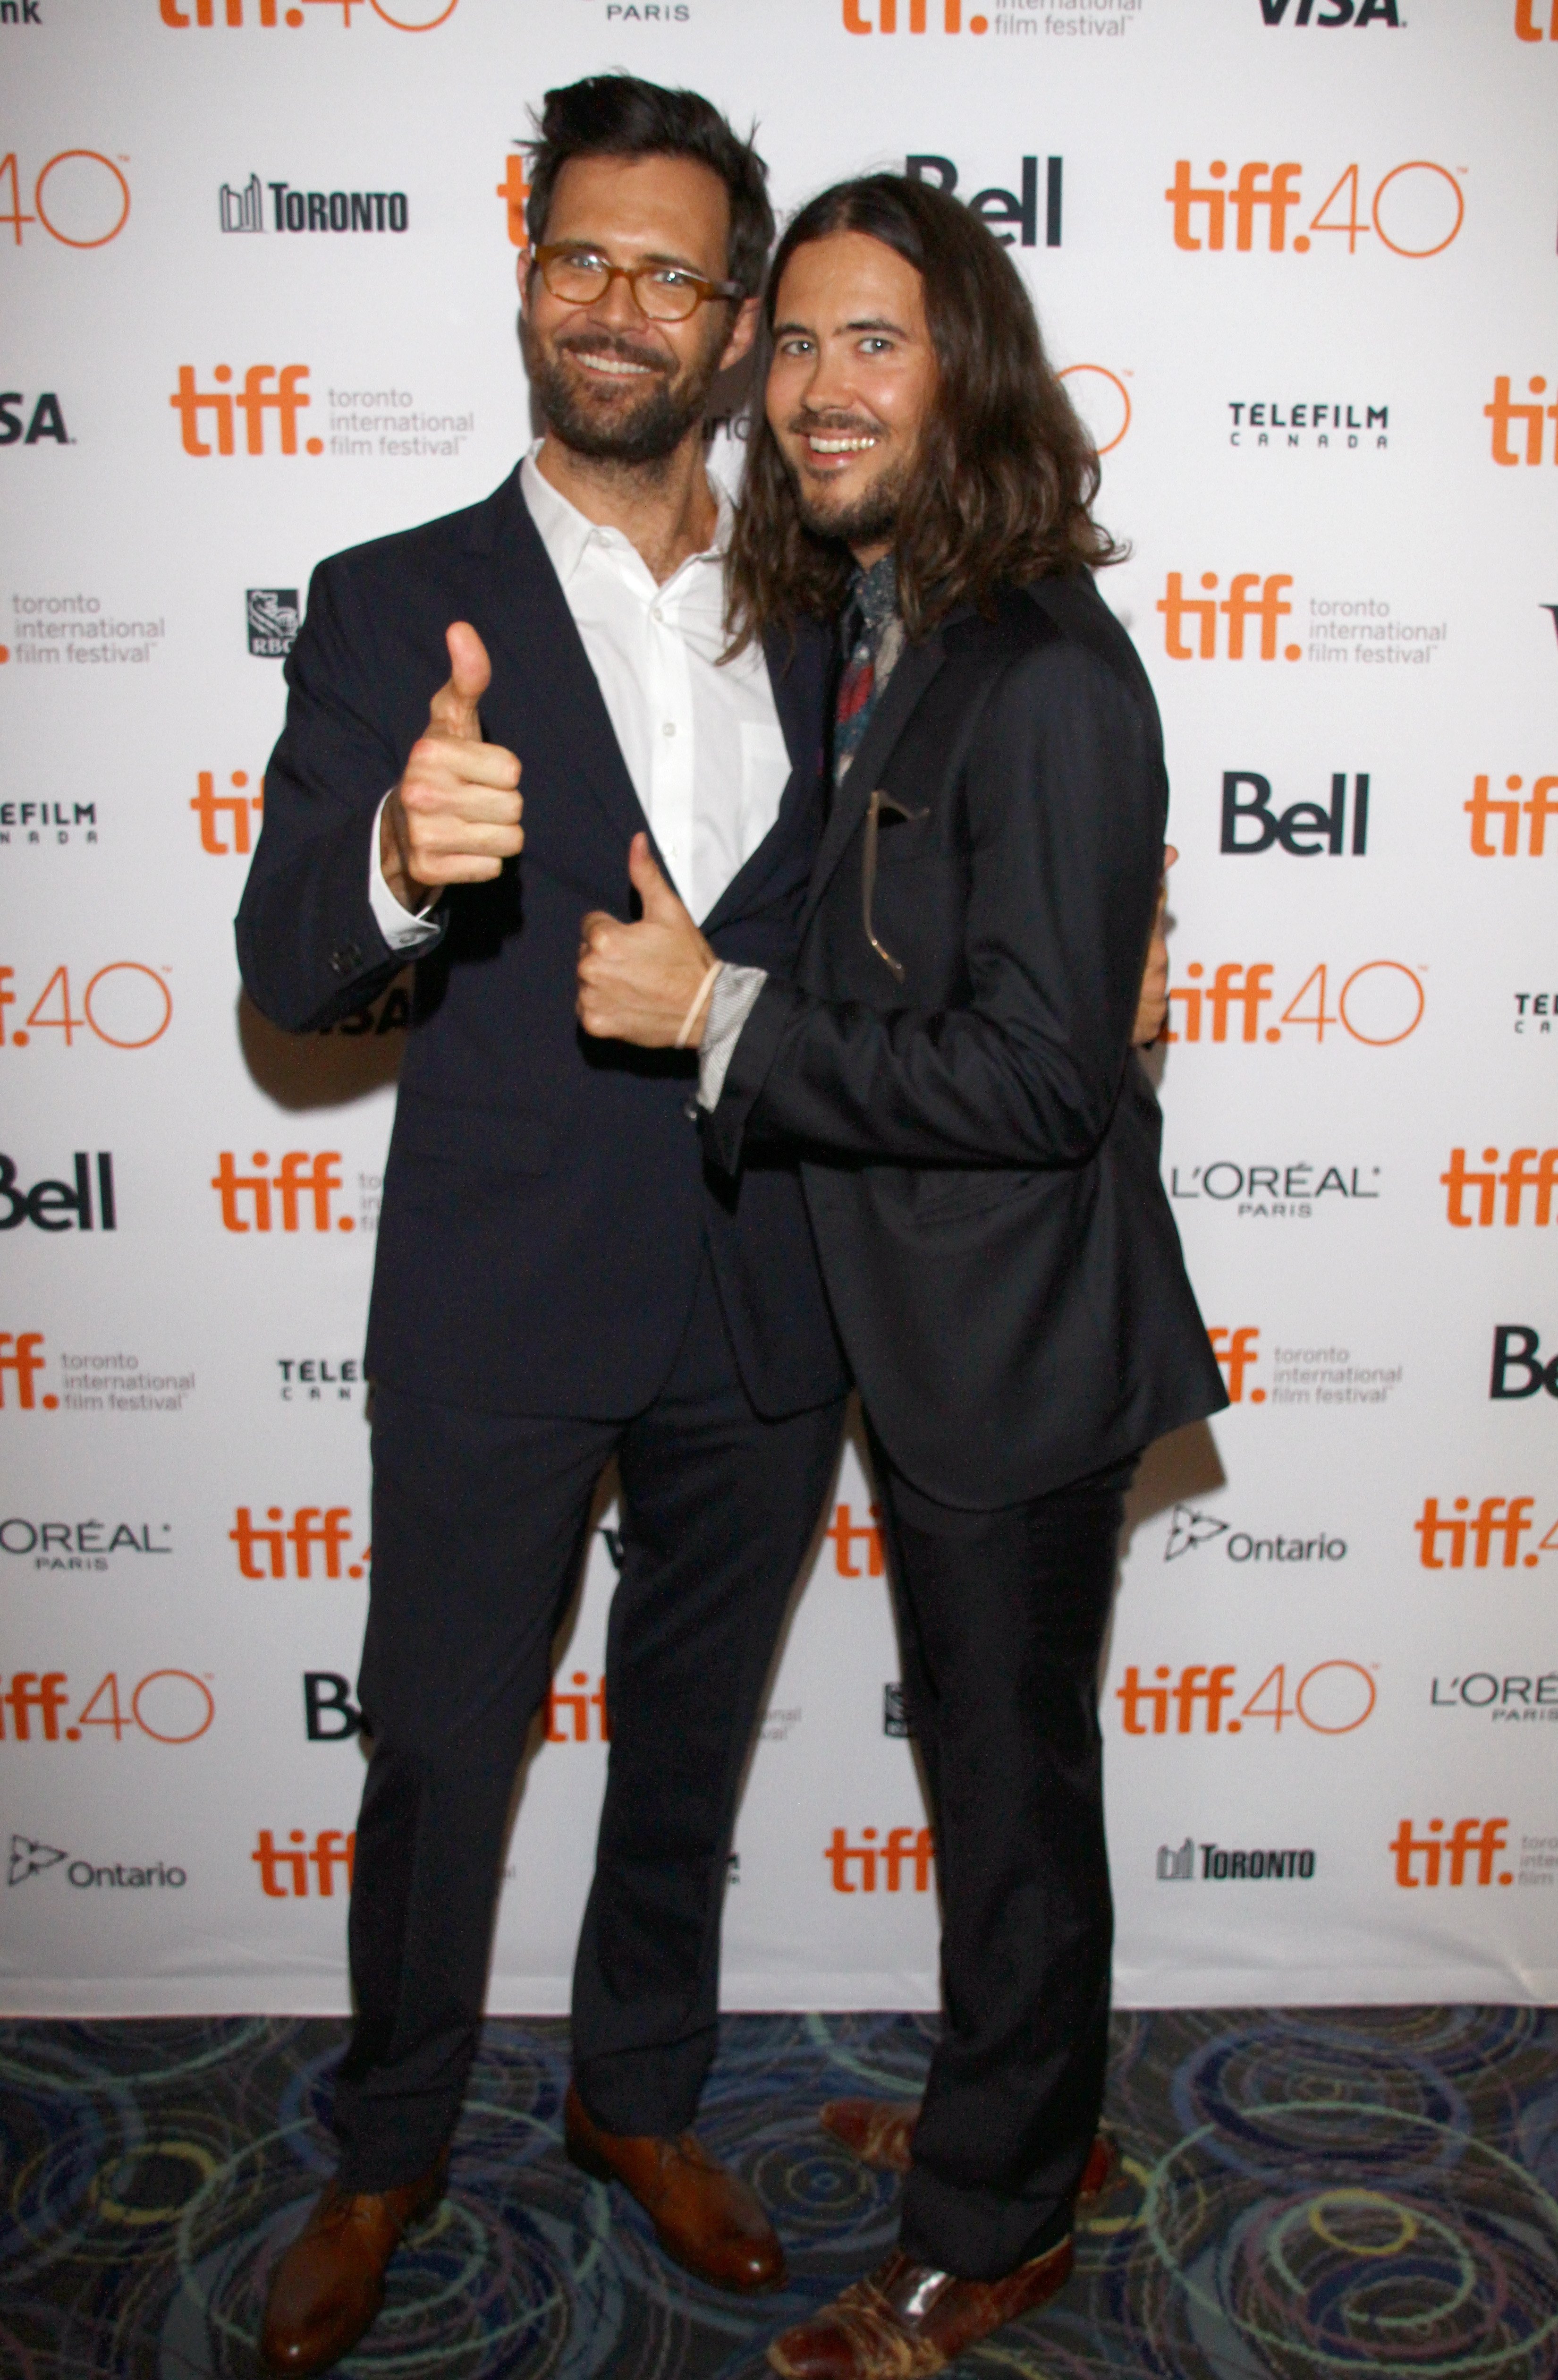 Actor Oz Perkins and artist Elvis Perkins attend the "February" photo call during the 2015 Toronto International Film Festival at Scotiabank on September 12, 2015 in Toronto, Canada | Photo: Getty Images